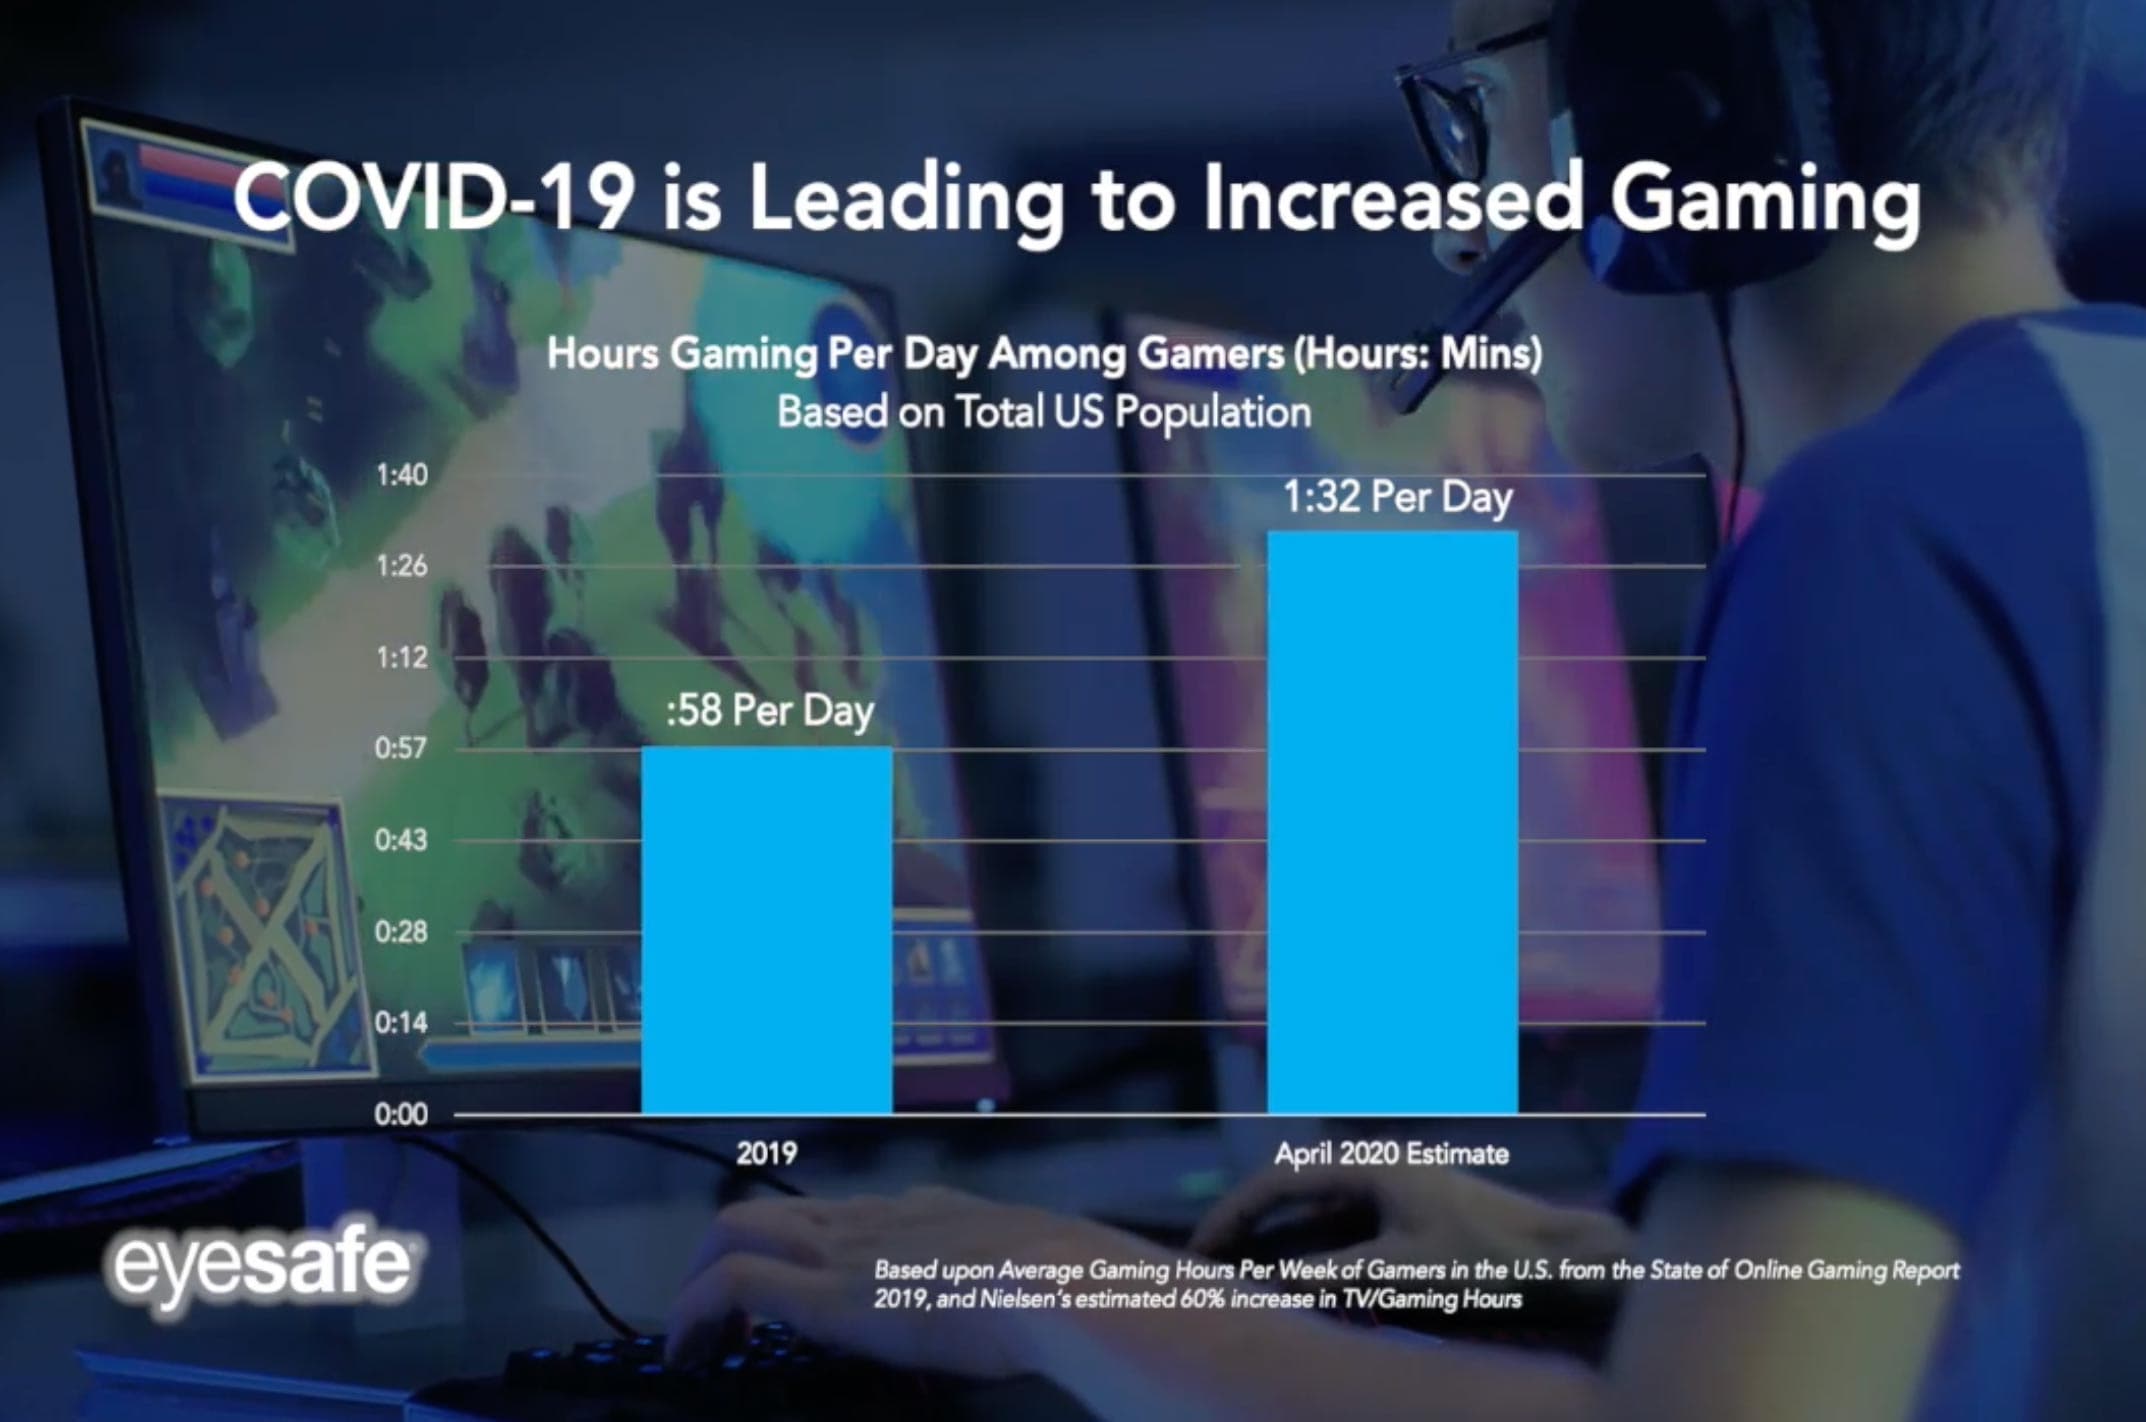 The Rise of Online Gaming During COVID-19 Lockdowns